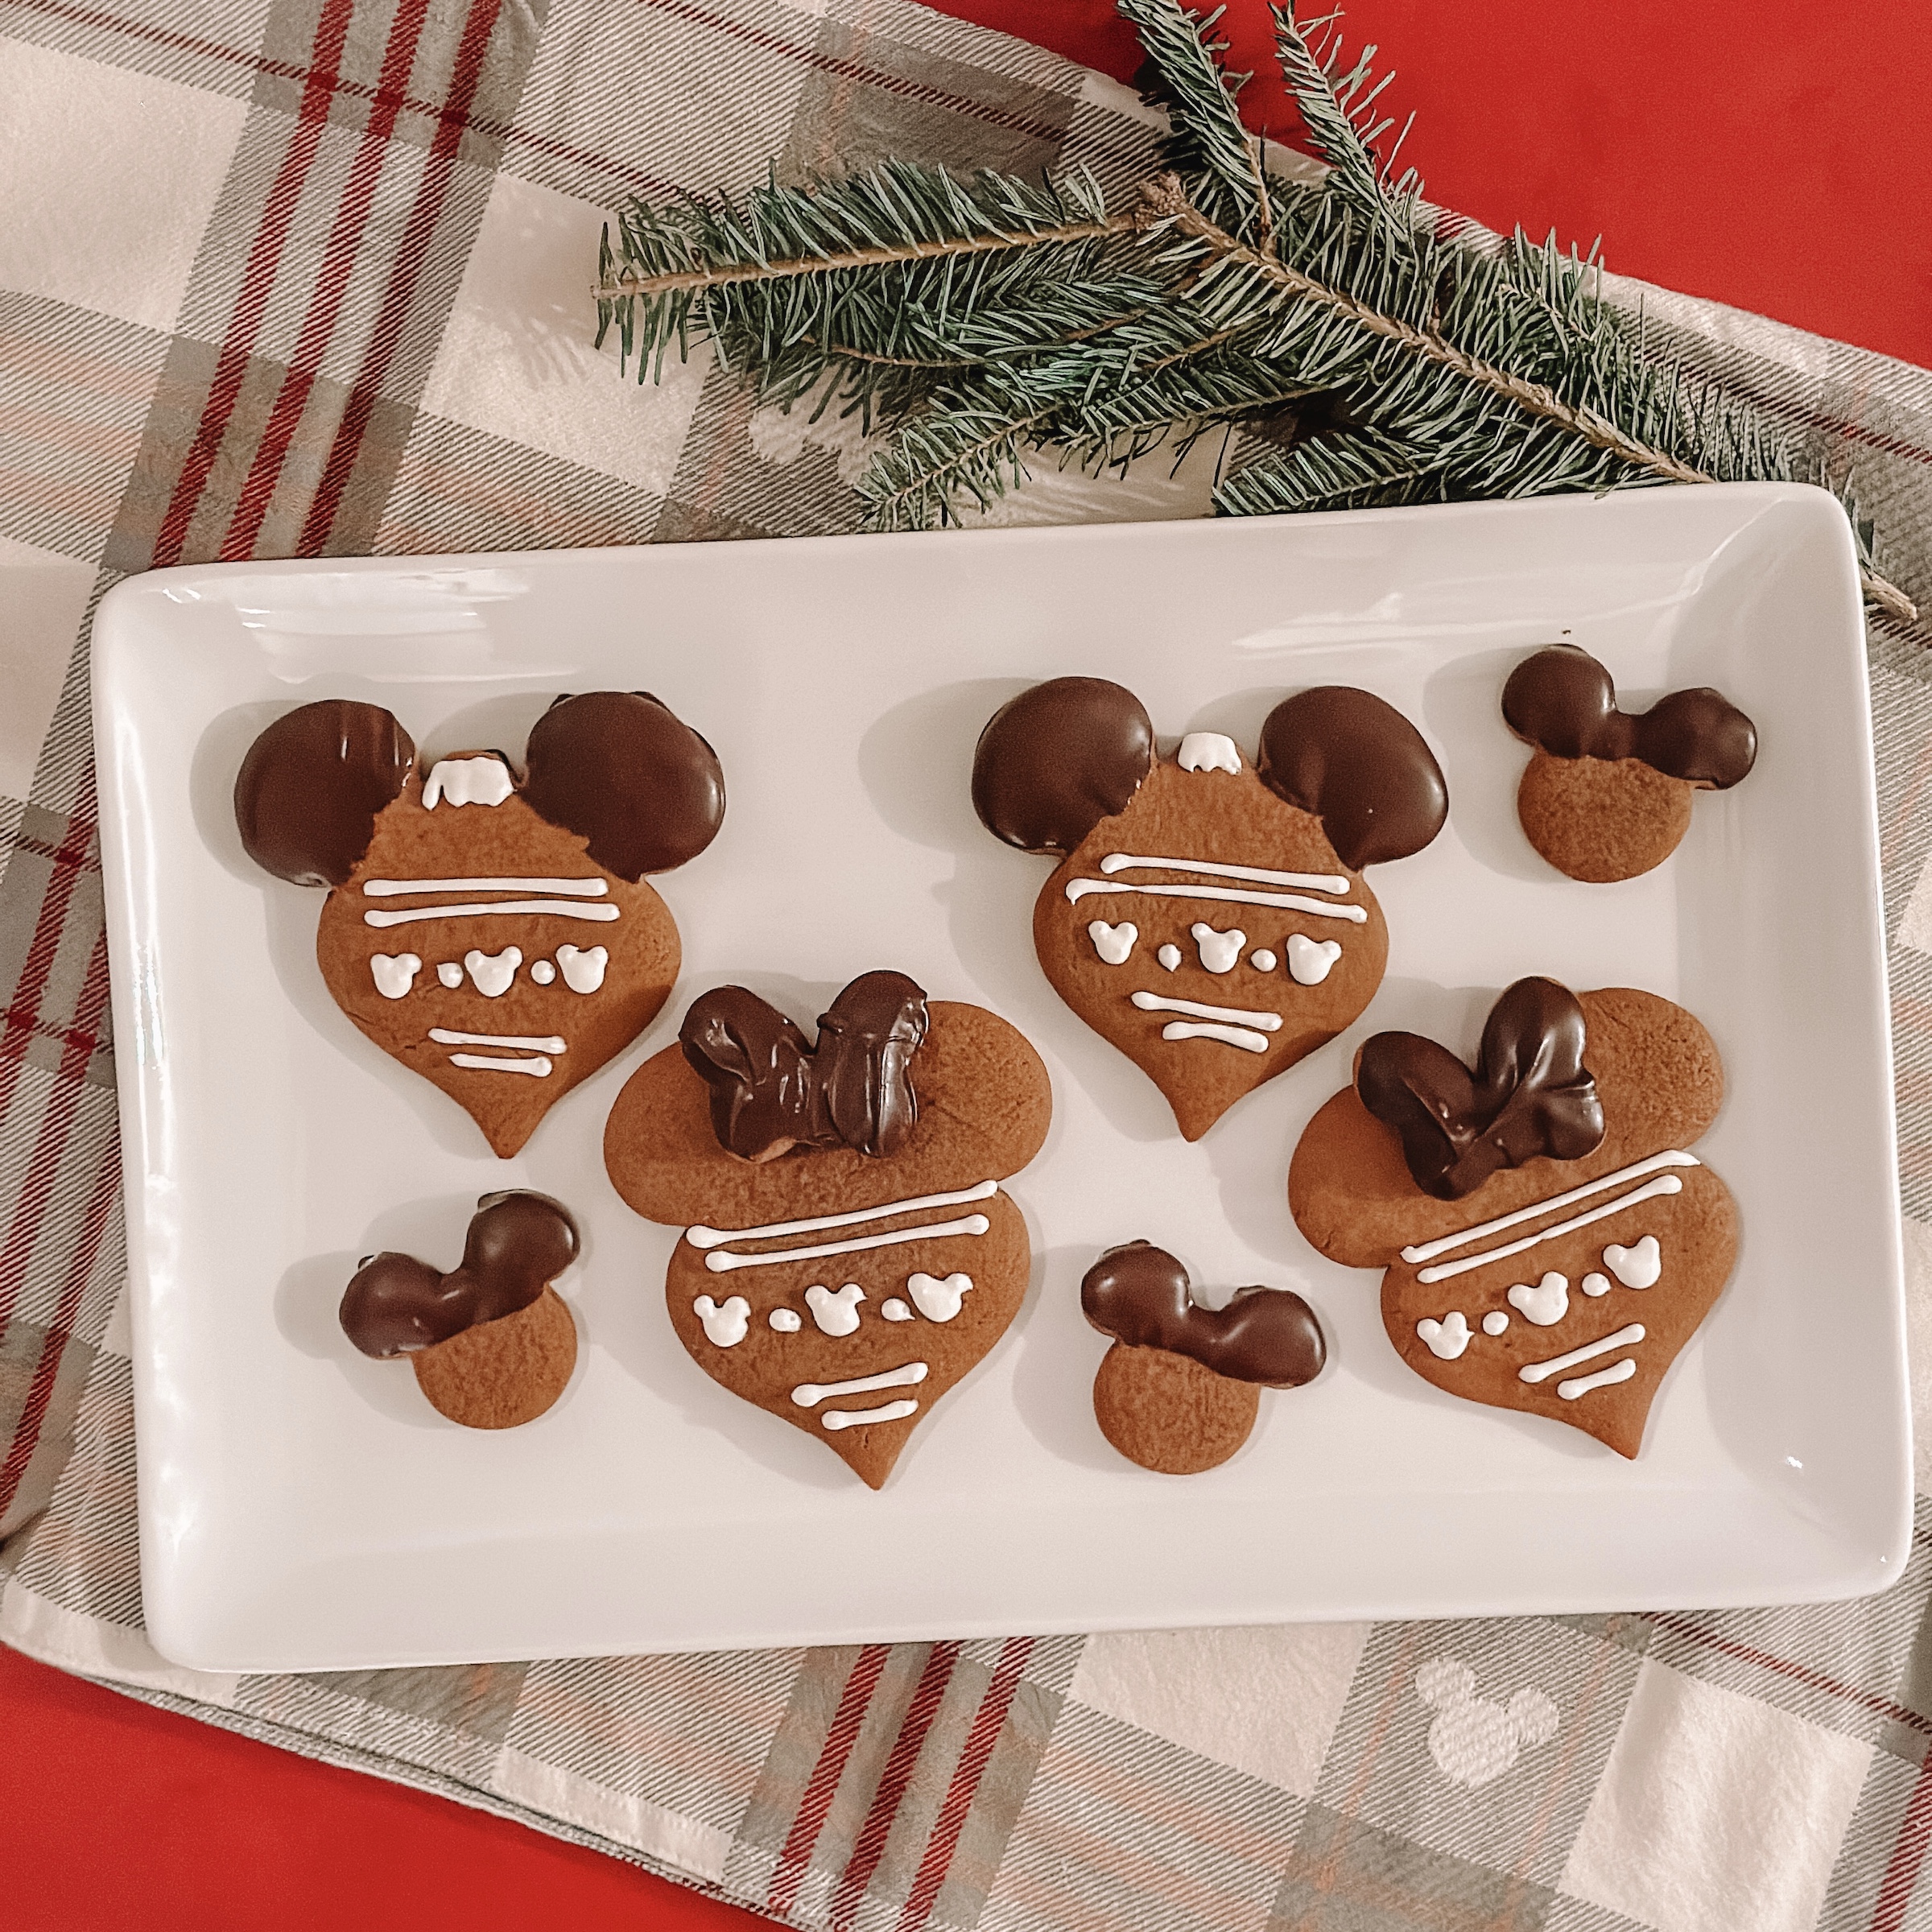 Chocolate Dipped Gingerbread Cookies (Mickey and Minnie ornament shaped gingerbread with chocolate dipped ears and bows on a platter)